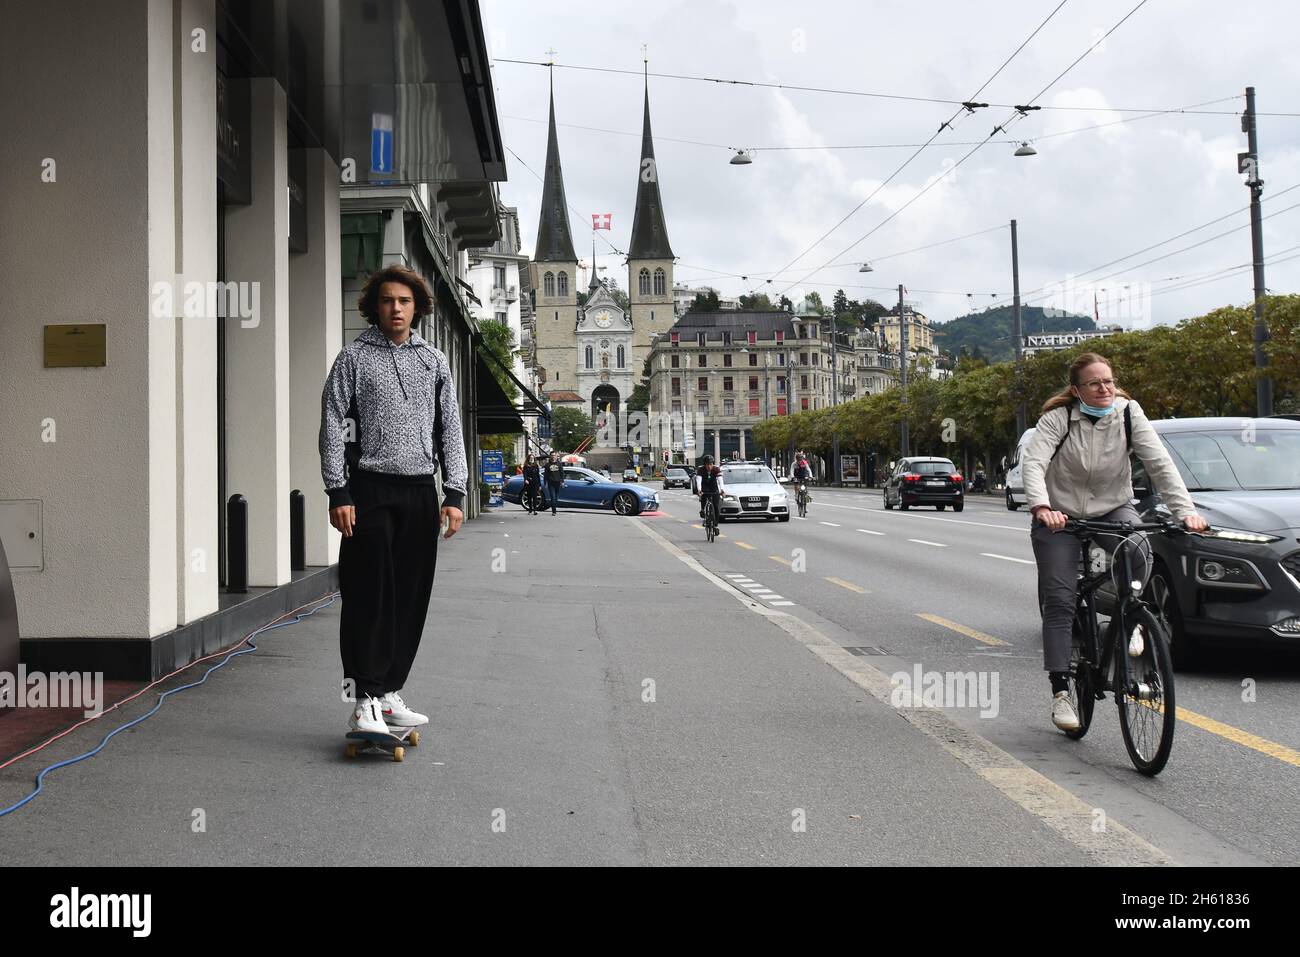 Young man skate boarding on pavement Lucerne, Switzerland Stock Photo